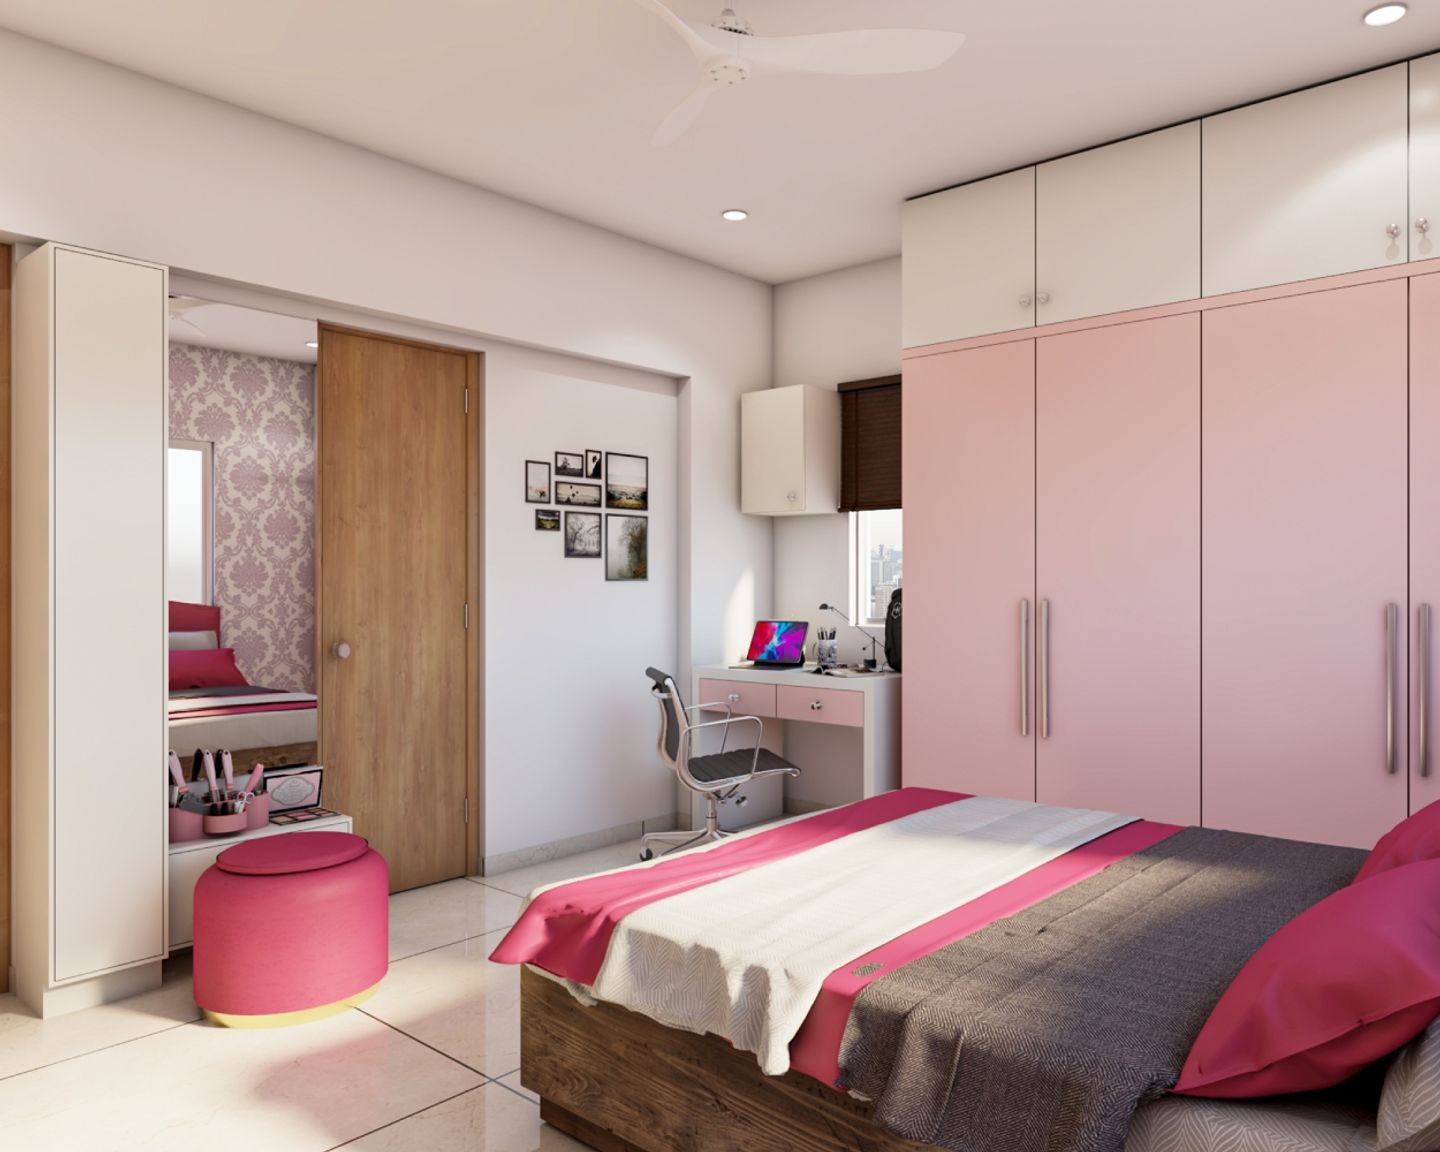 Modern Master Bedroom Design With Pink Interiors